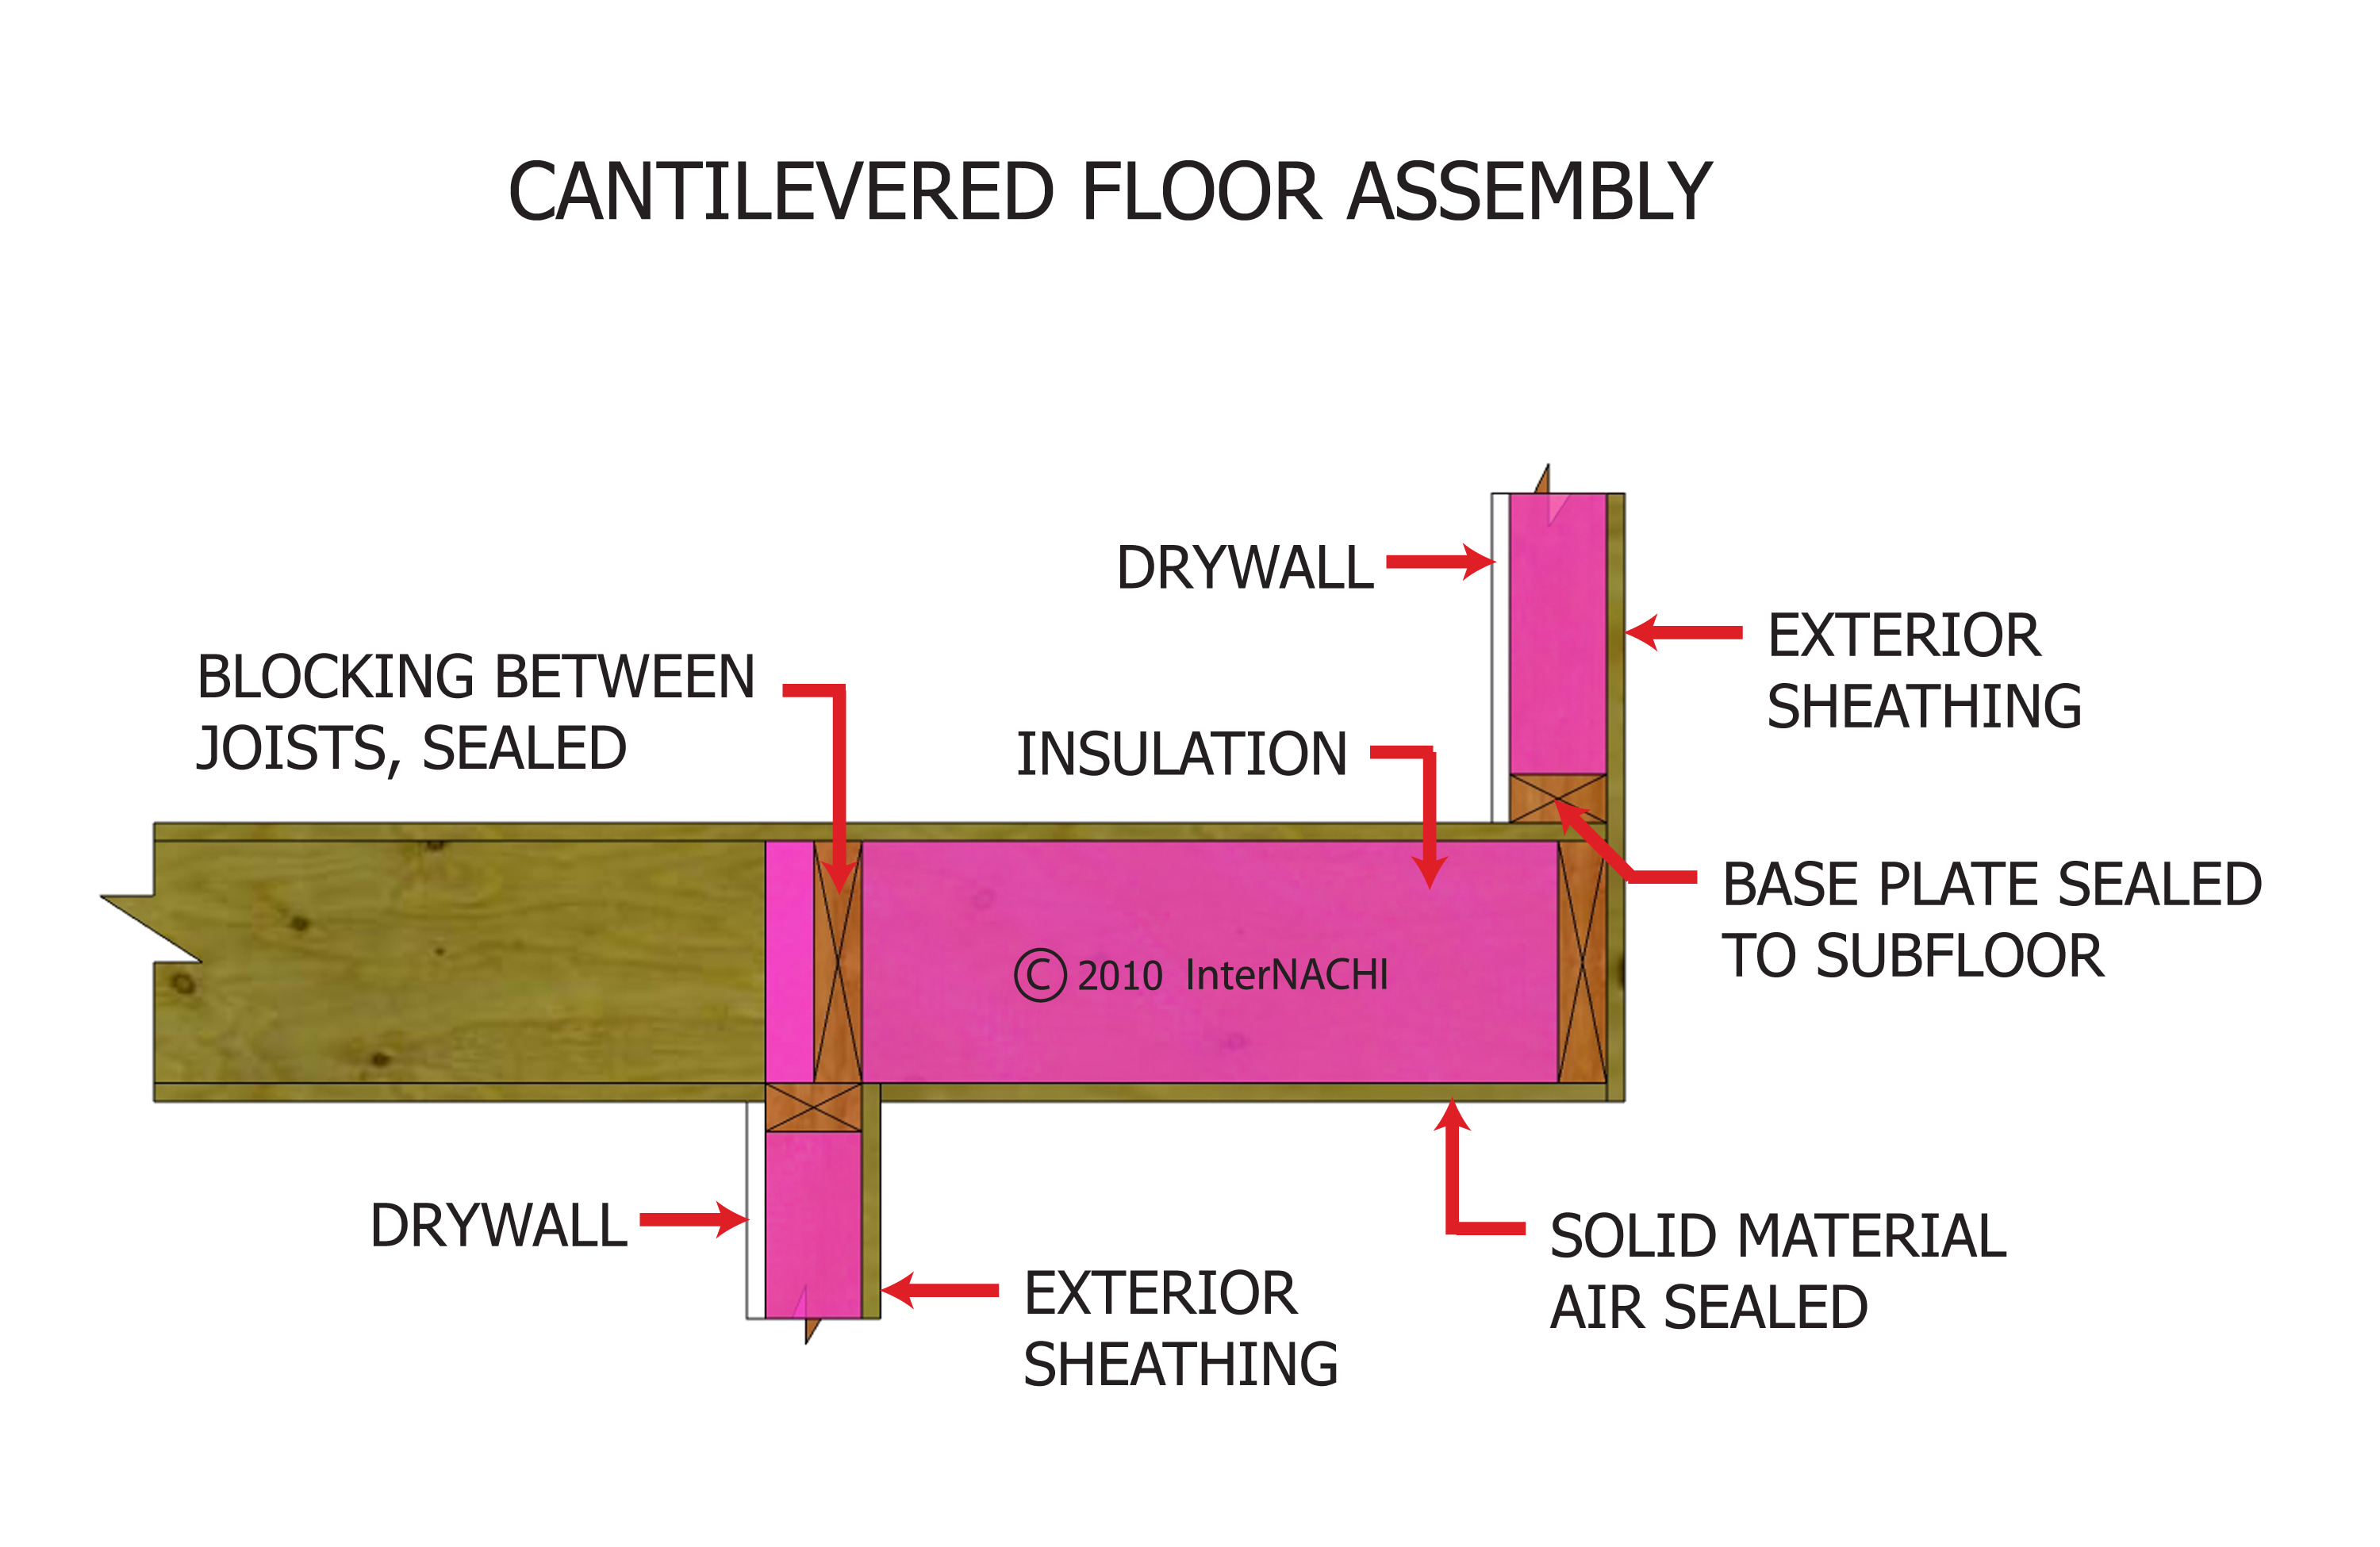 Cantilevered floor assembly.